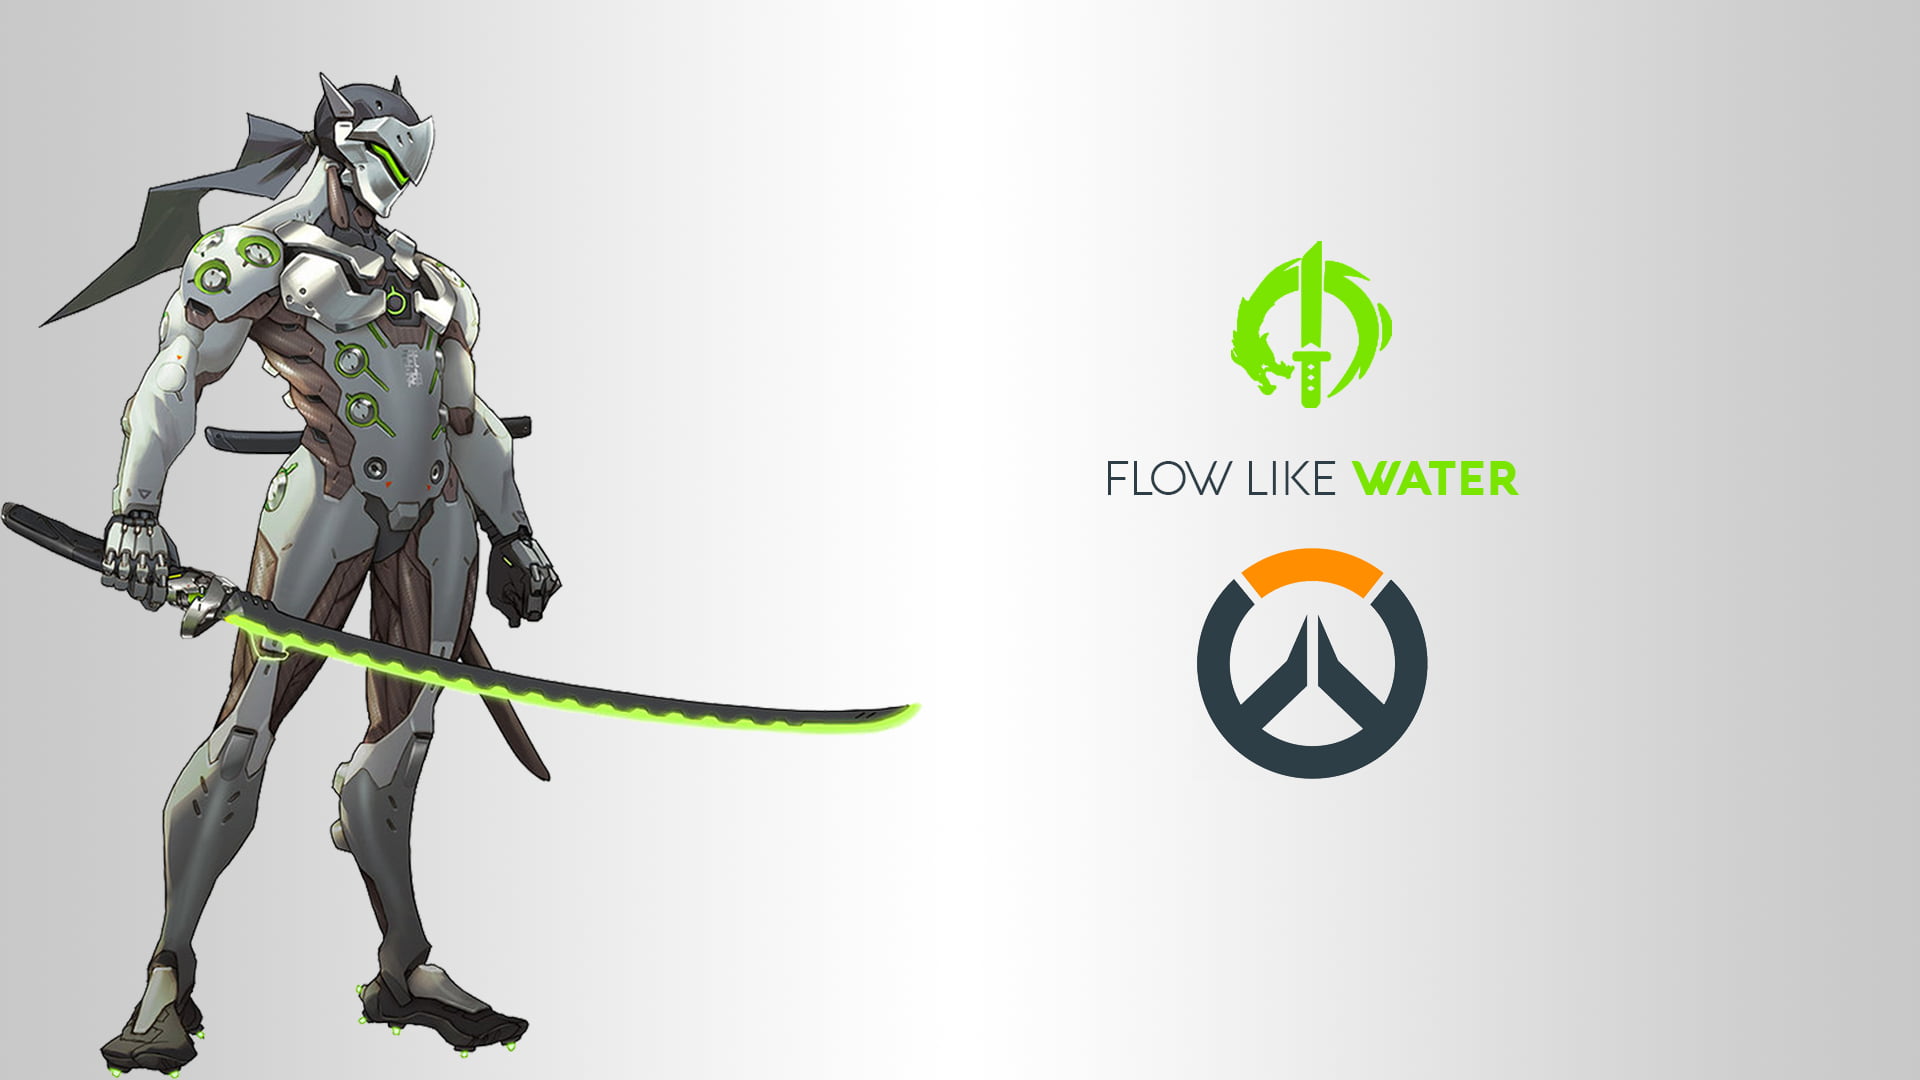 Overwatch character, Blizzard Entertainment, Overwatch, video games, logo